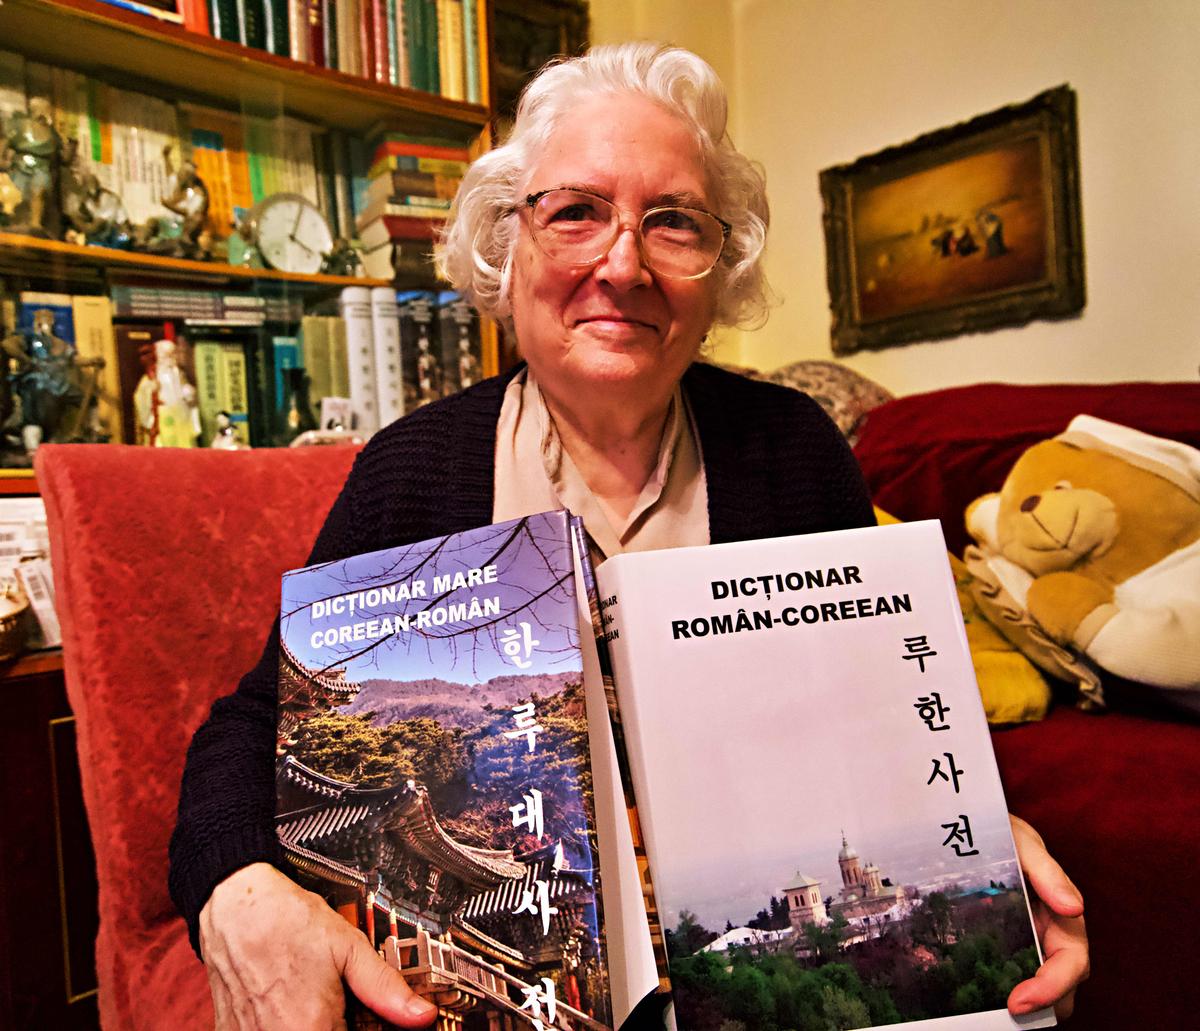 Mircioiu has published a Romanian-Korean dictionary containing 160,000 words for her husband, who may have forgotten Romanian. (Courtesy of Director Kim Deok-young)